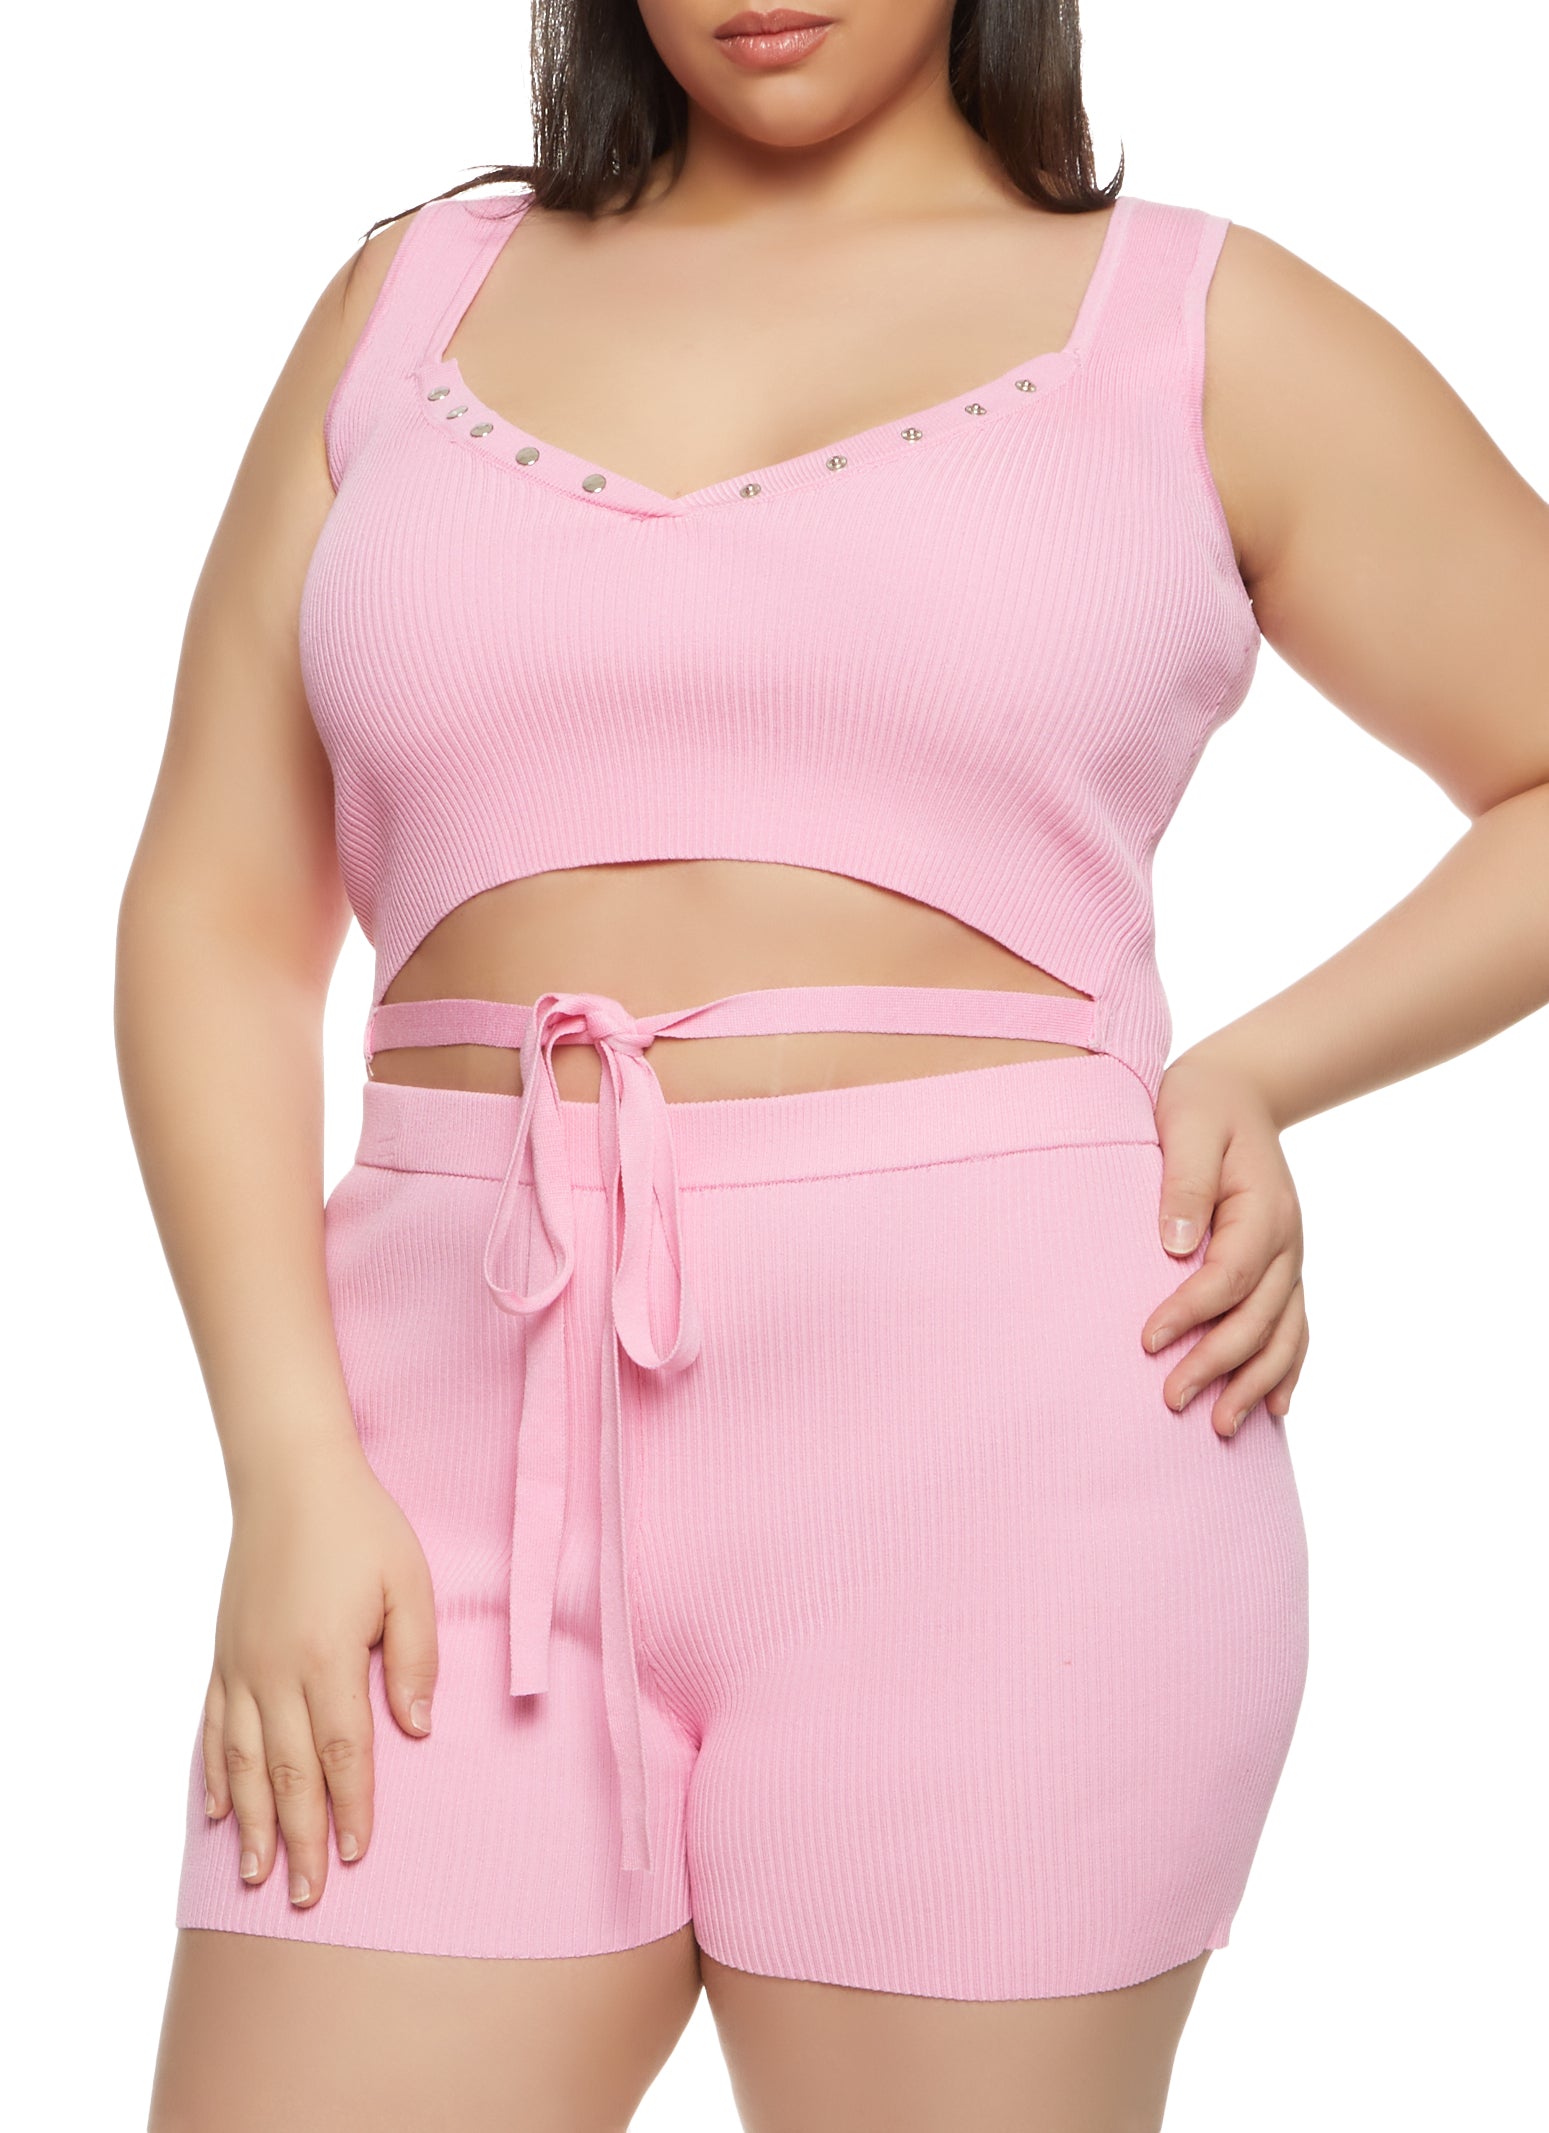  5 Pack: Womens Plus Just My Size Summer Cute Crop